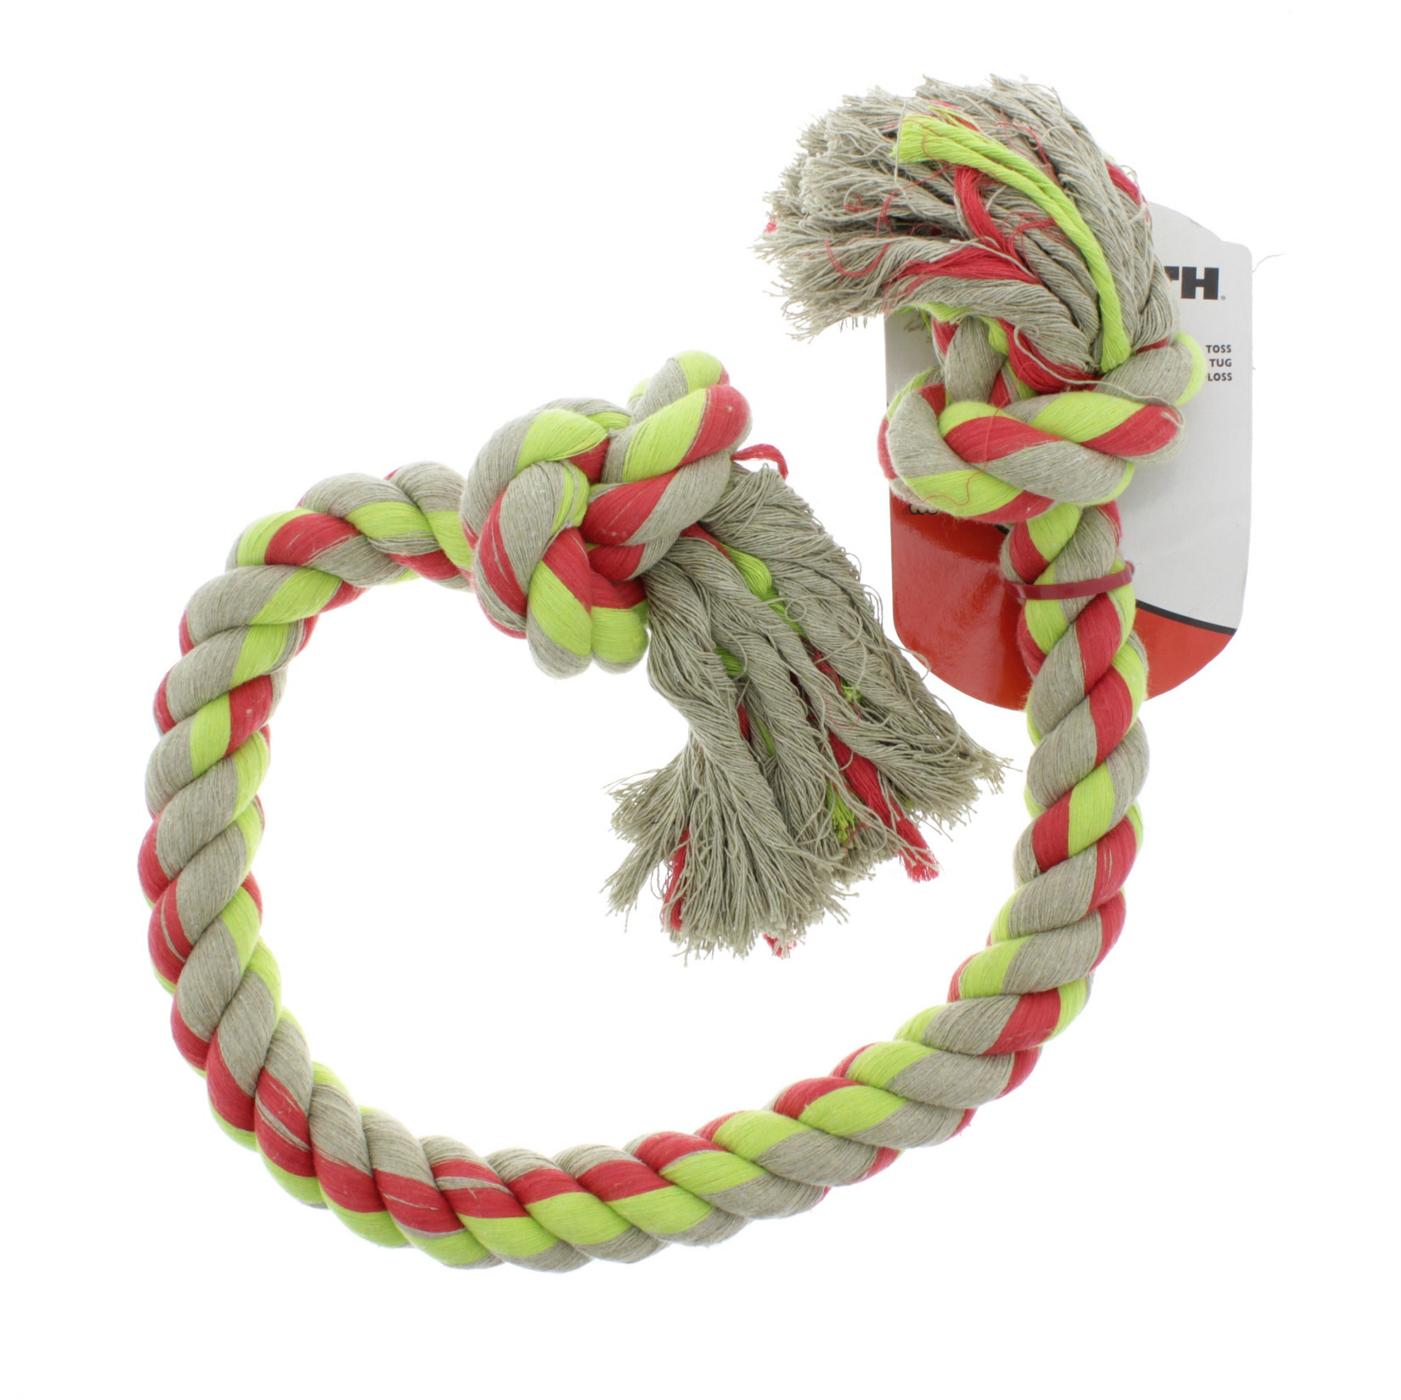 Mammoth Flossy Chews 3 Knot Rope Tug Dog Toy, Ships in Assorted